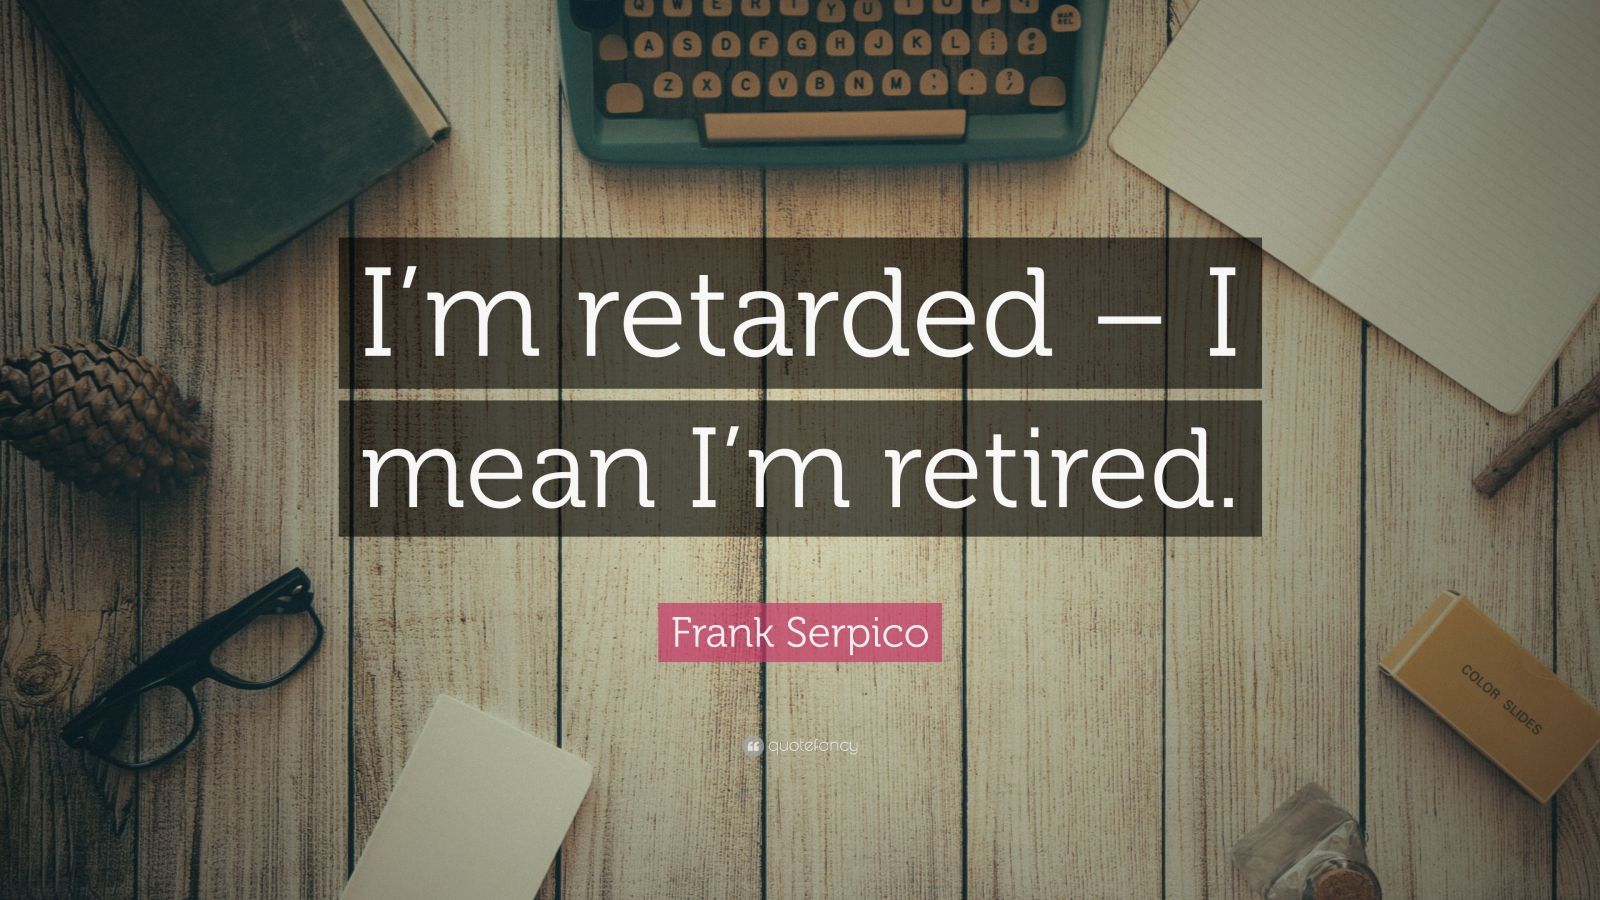 Frank Serpico Quote: "I'm retarded - I mean I'm retired." (7 wallpapers) - Quotefancy